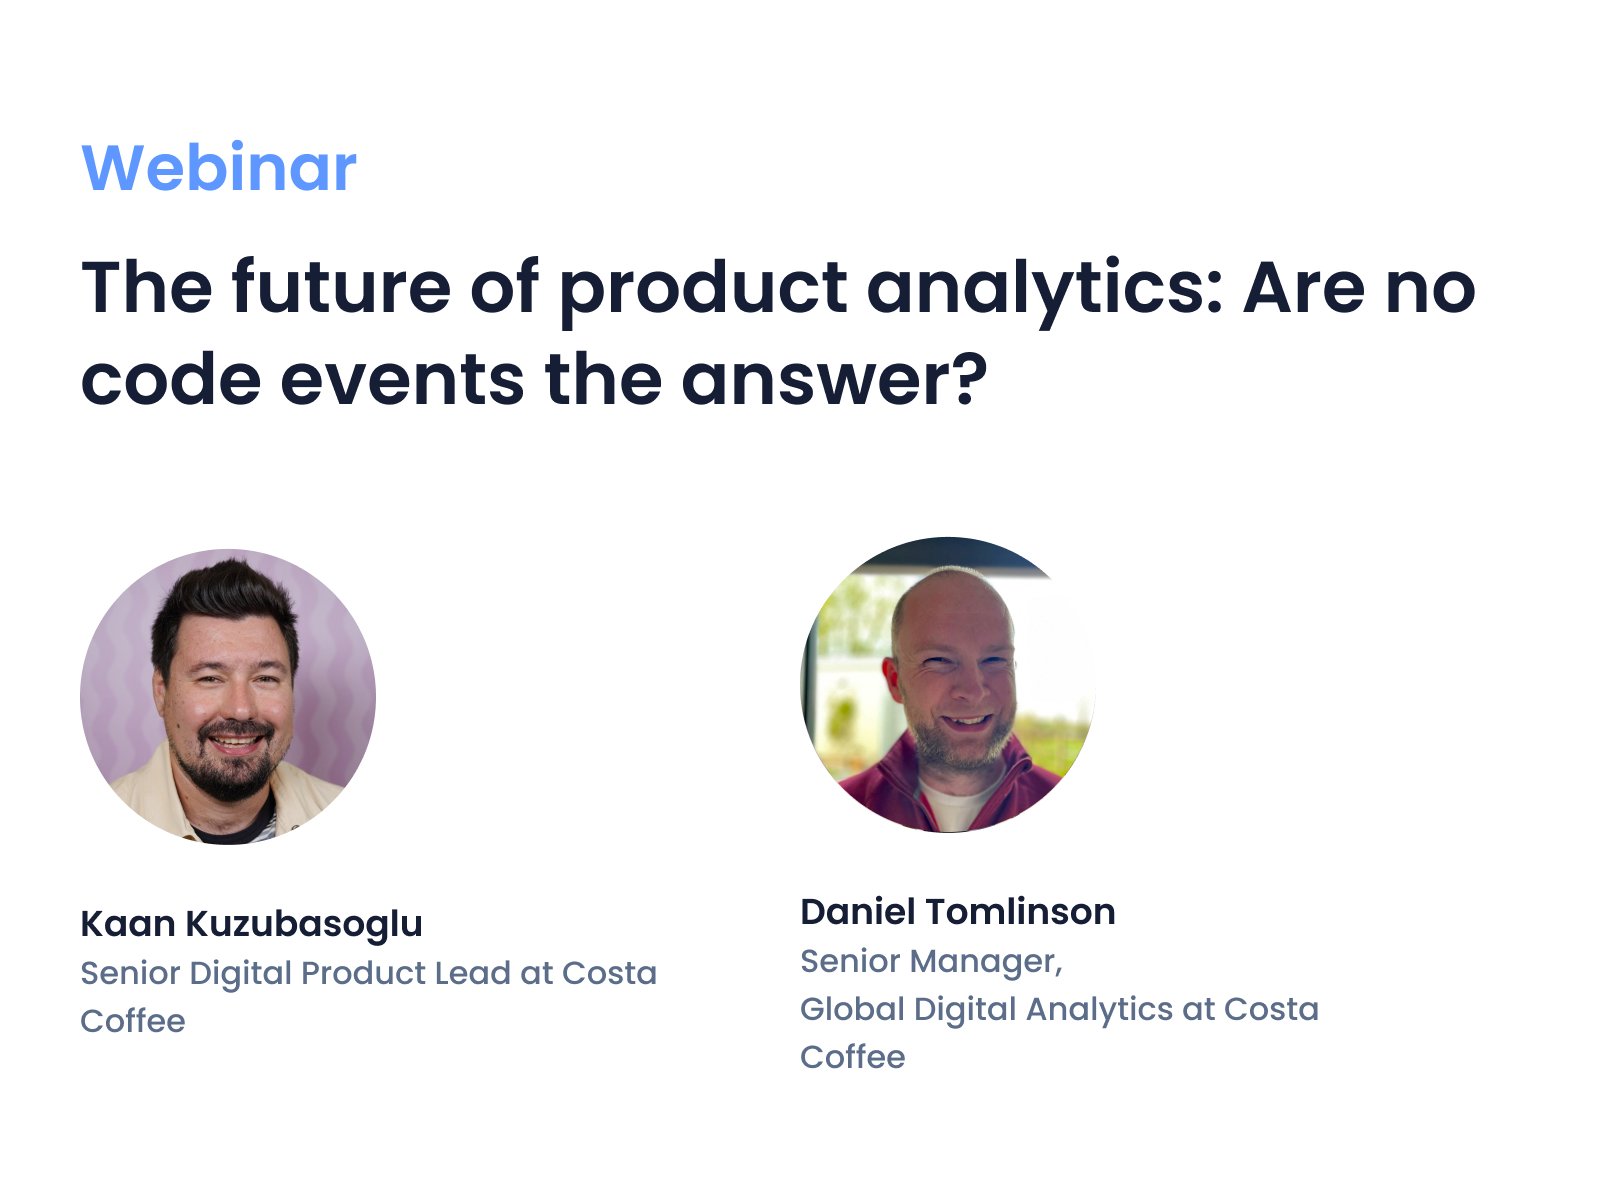 The future of product analytics: Are no code events the answer?